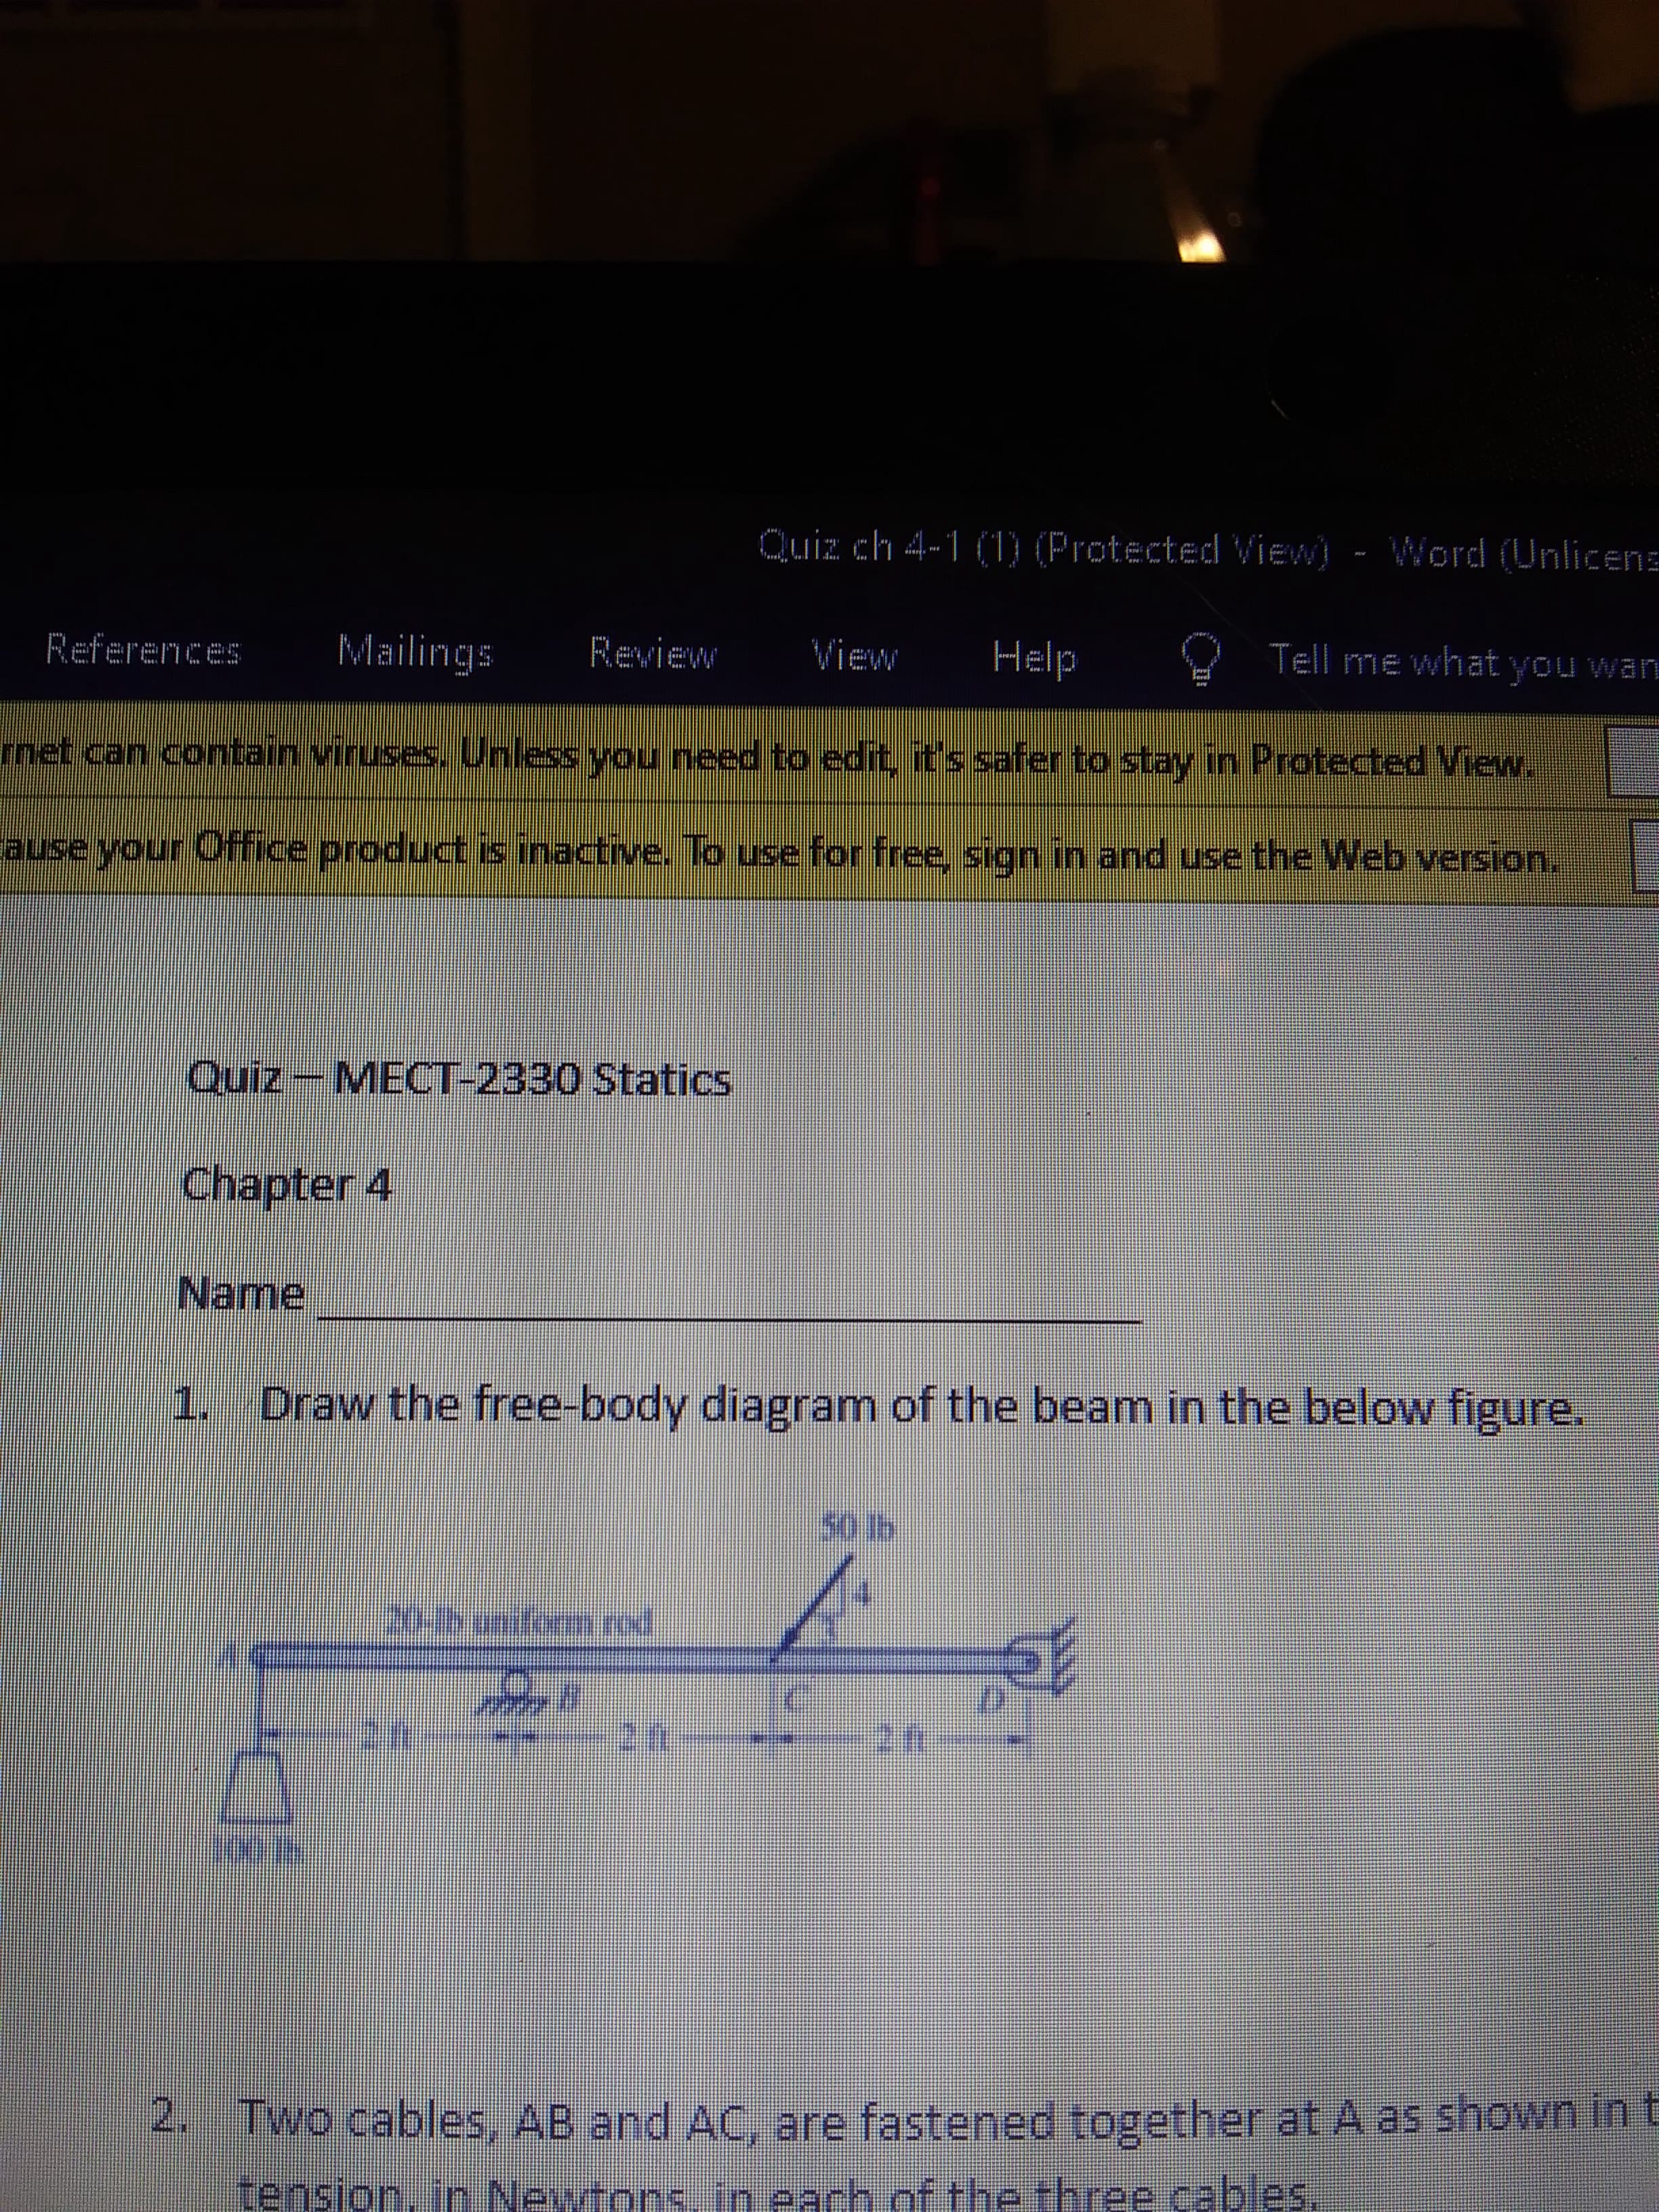 1. Draw the free-body diagram of the beam in the below figure.
50lb
20lhunifornrod
20
